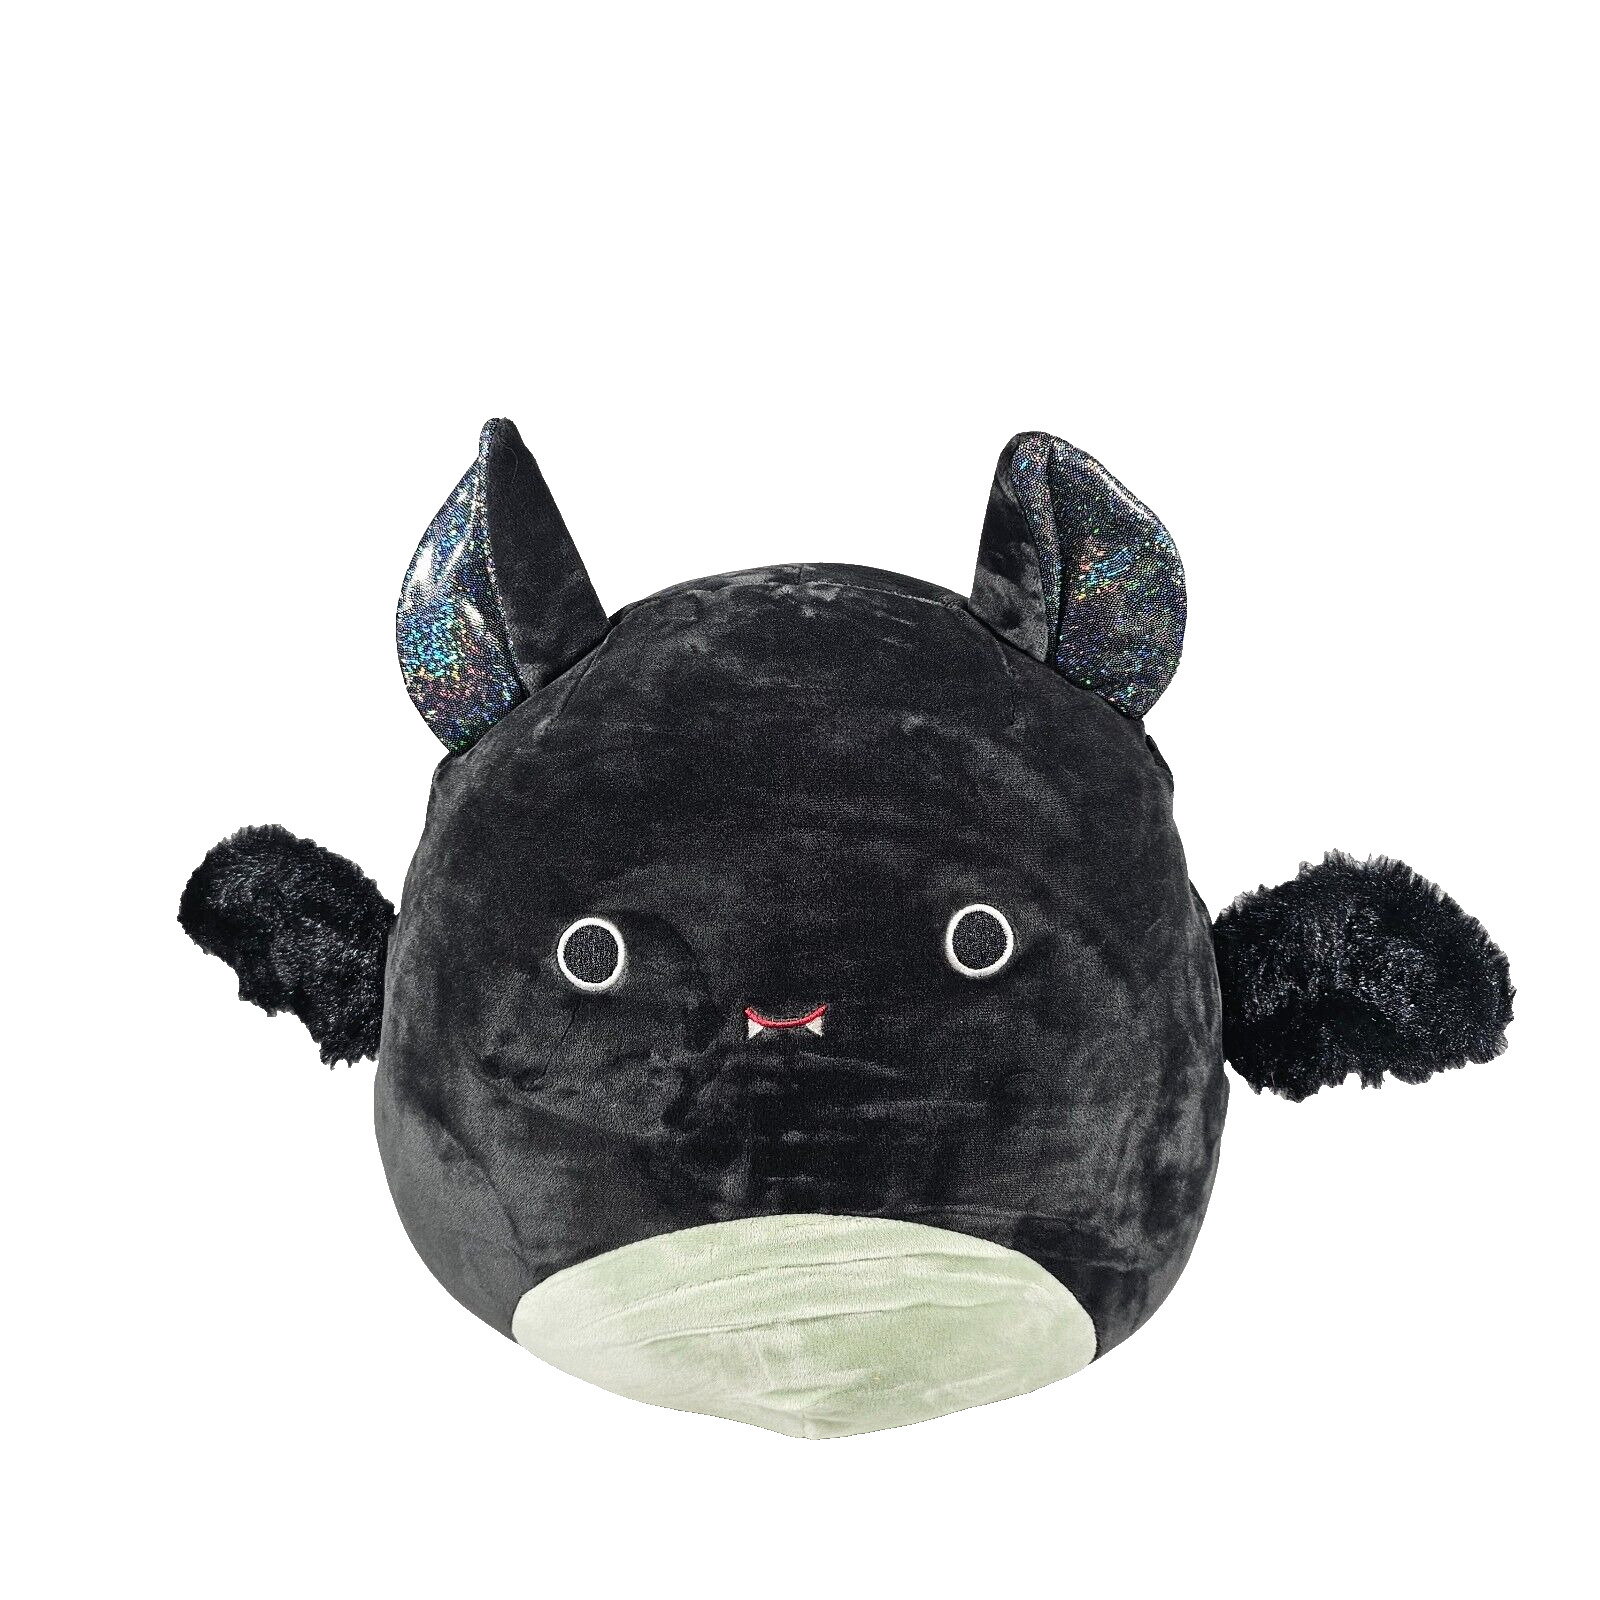 Squishmallow Bart The Bat 2022 IRIDESCENT EARS Fuzzy Wings Stuffed Toy Black 12"